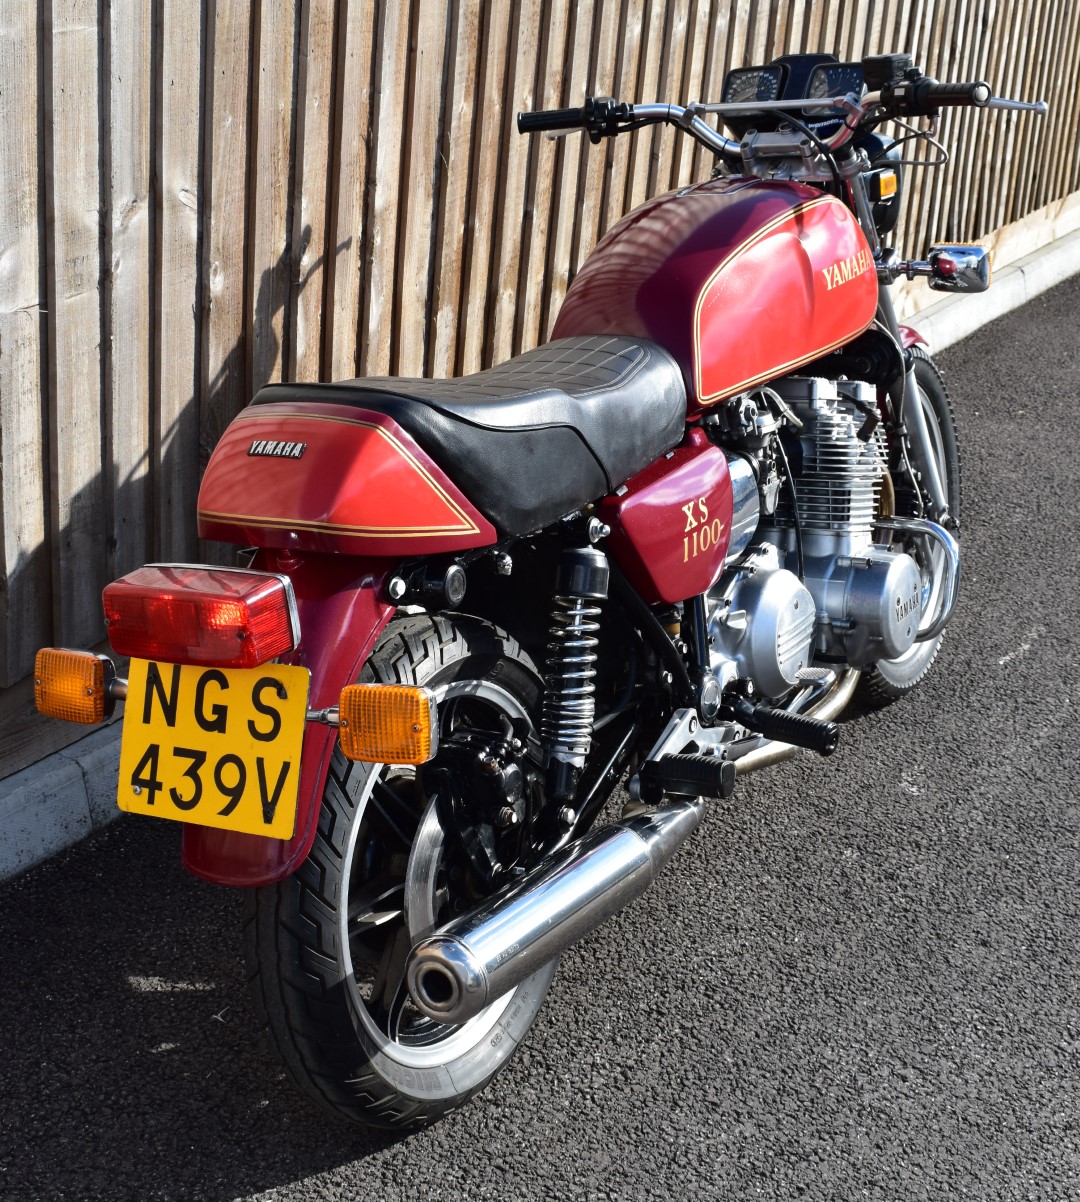 1980 Yamaha XS1100 motorbike registration NGS 439V, with V5c, used by the vendor for continental - Image 16 of 17